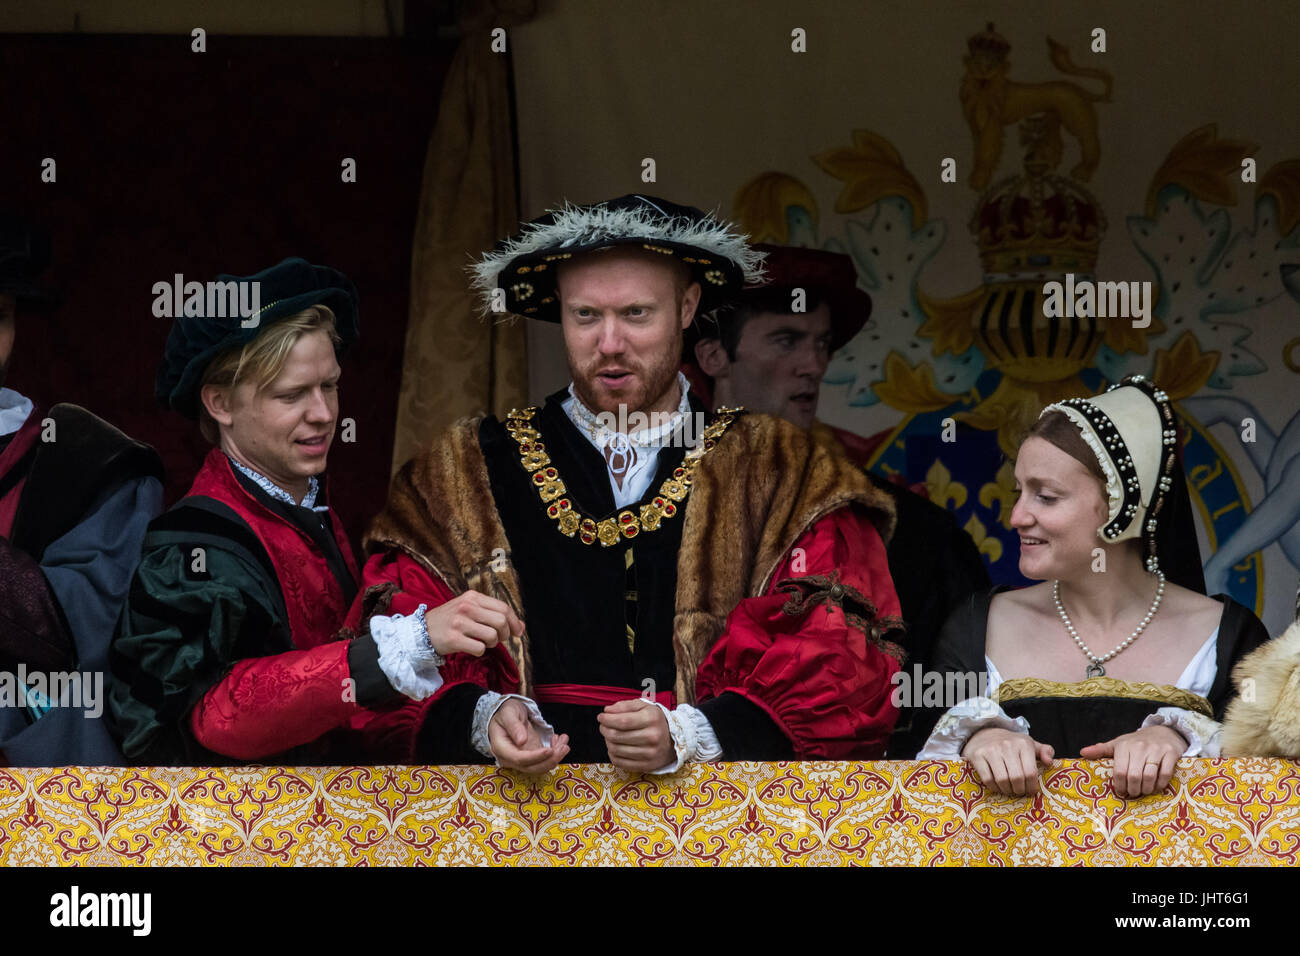 East Molesey, London, UK. 15th July, 2017. Historical re-enactments during the Tudor Joust at Hampton Court Palace © Guy Corbishley/Alamy Live News Stock Photo